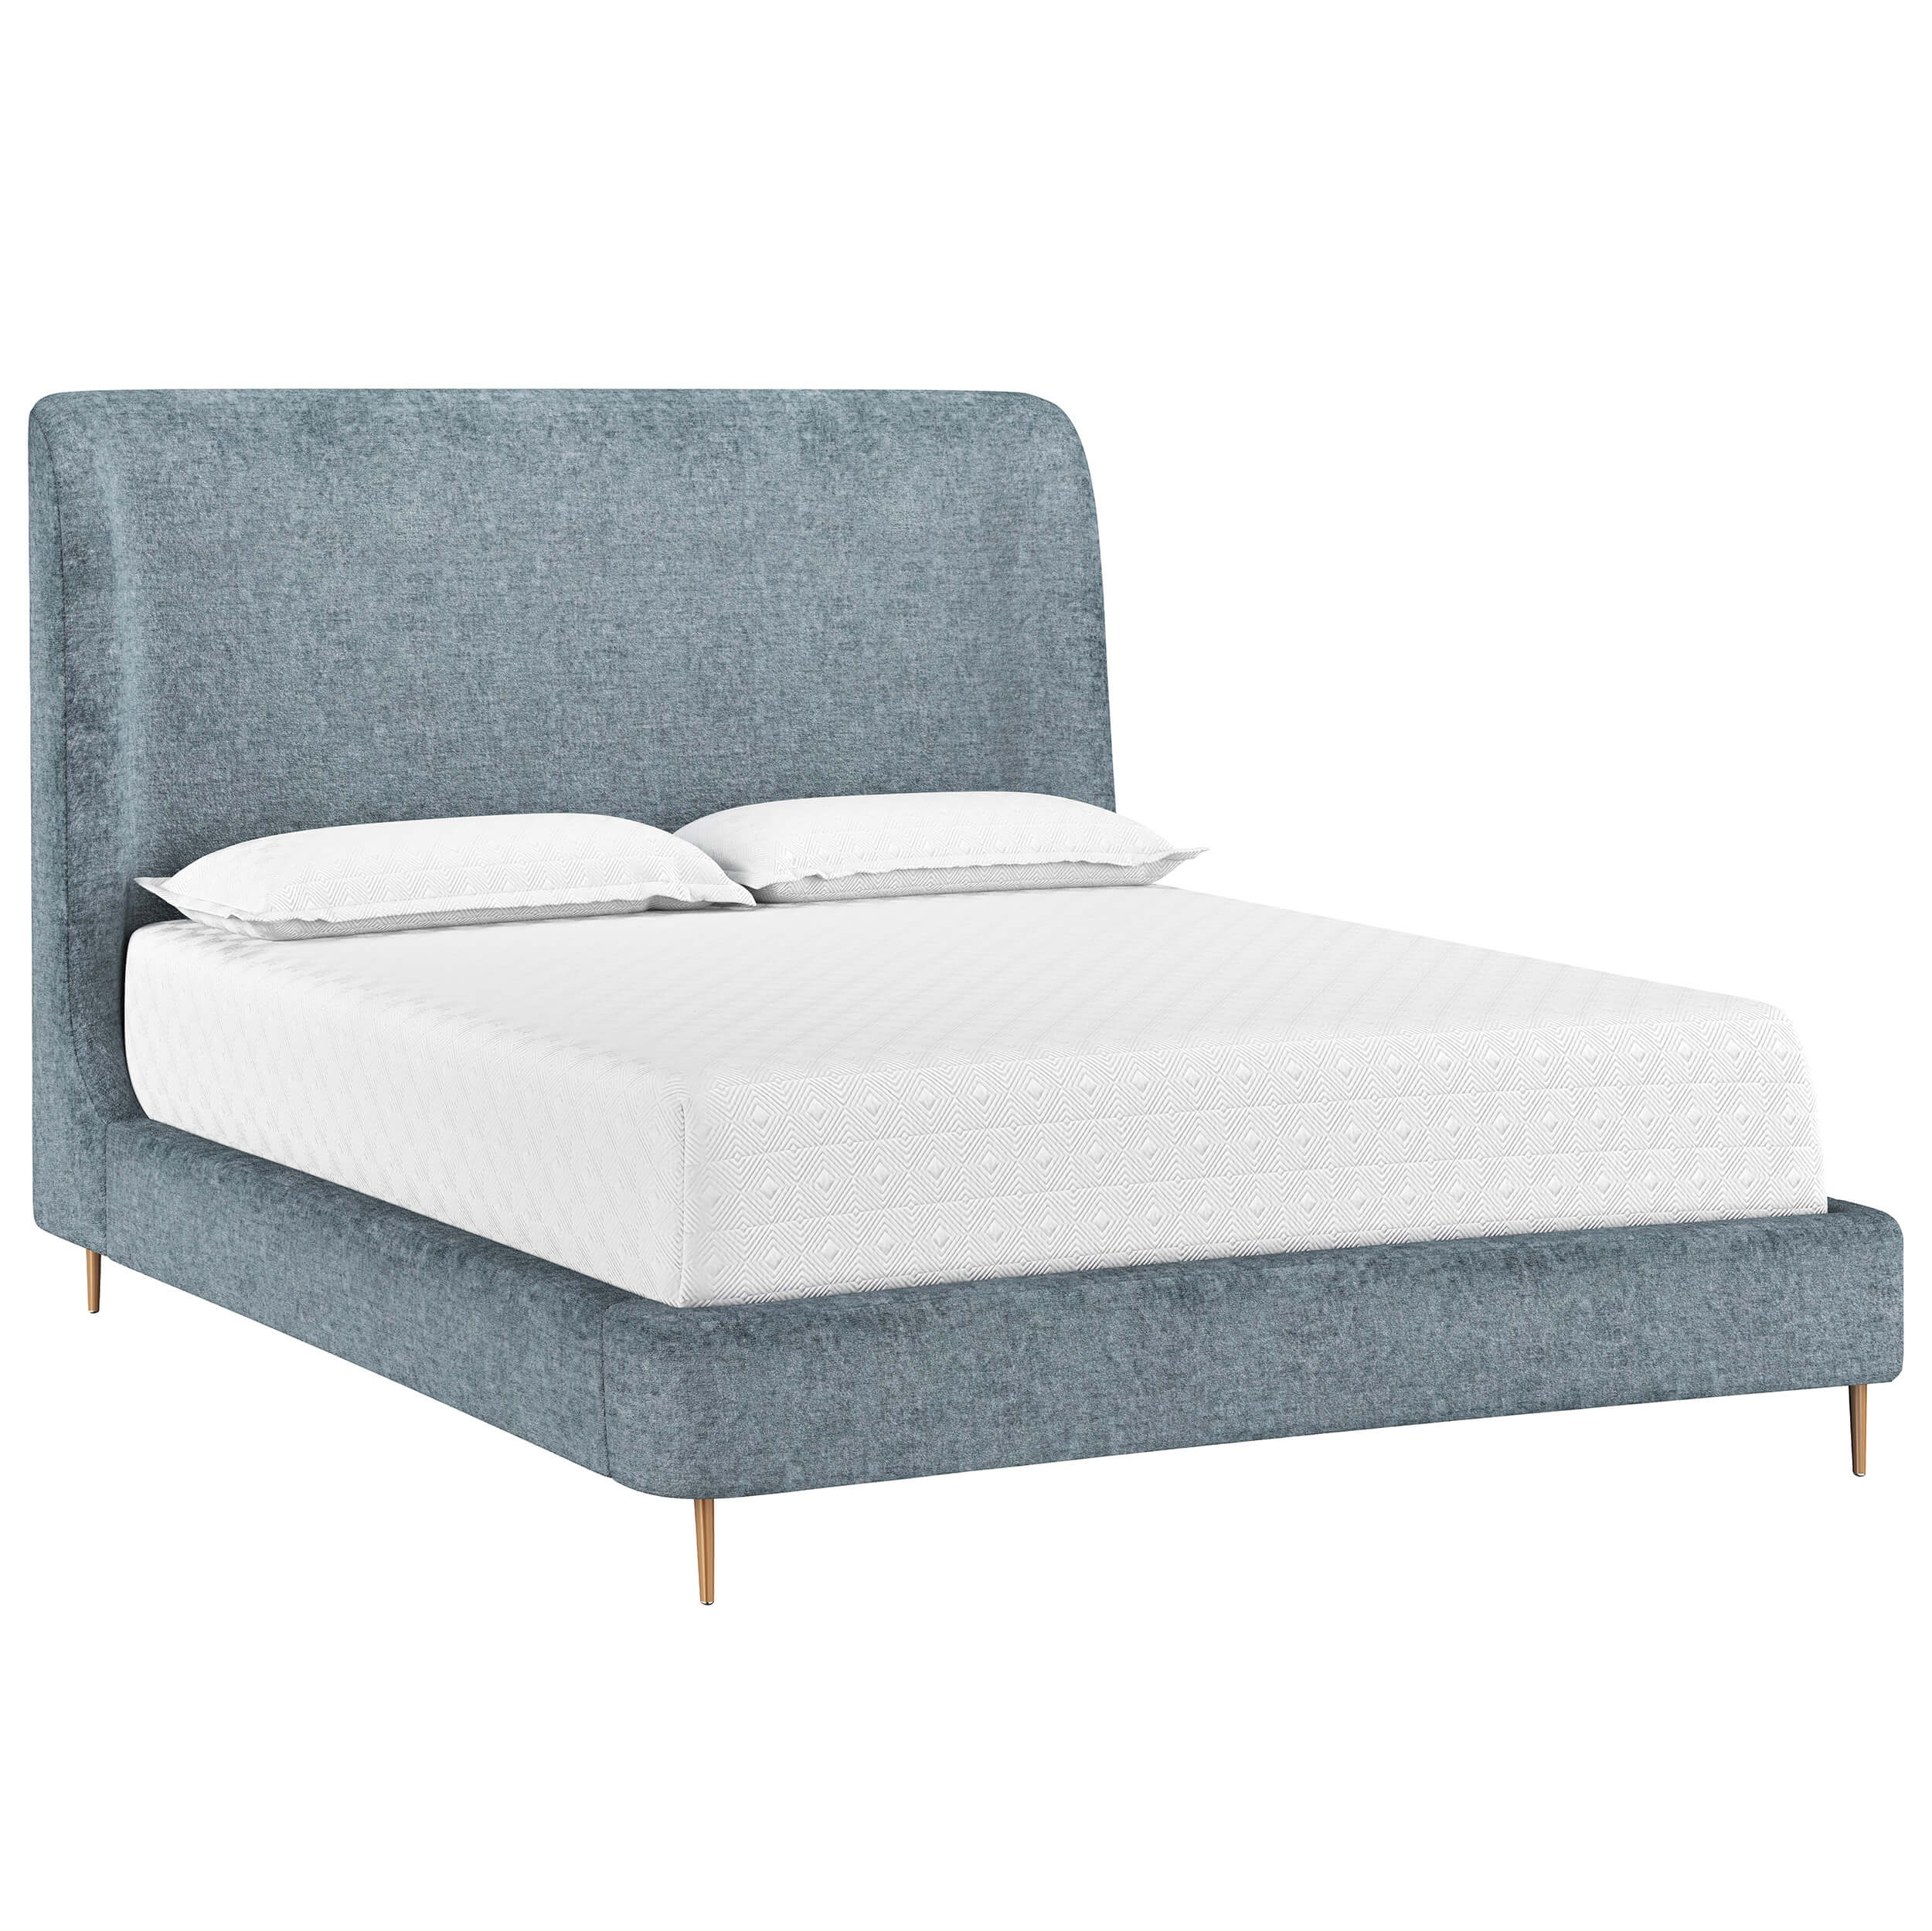 Image of Tierra Bed, Bergen French Blue